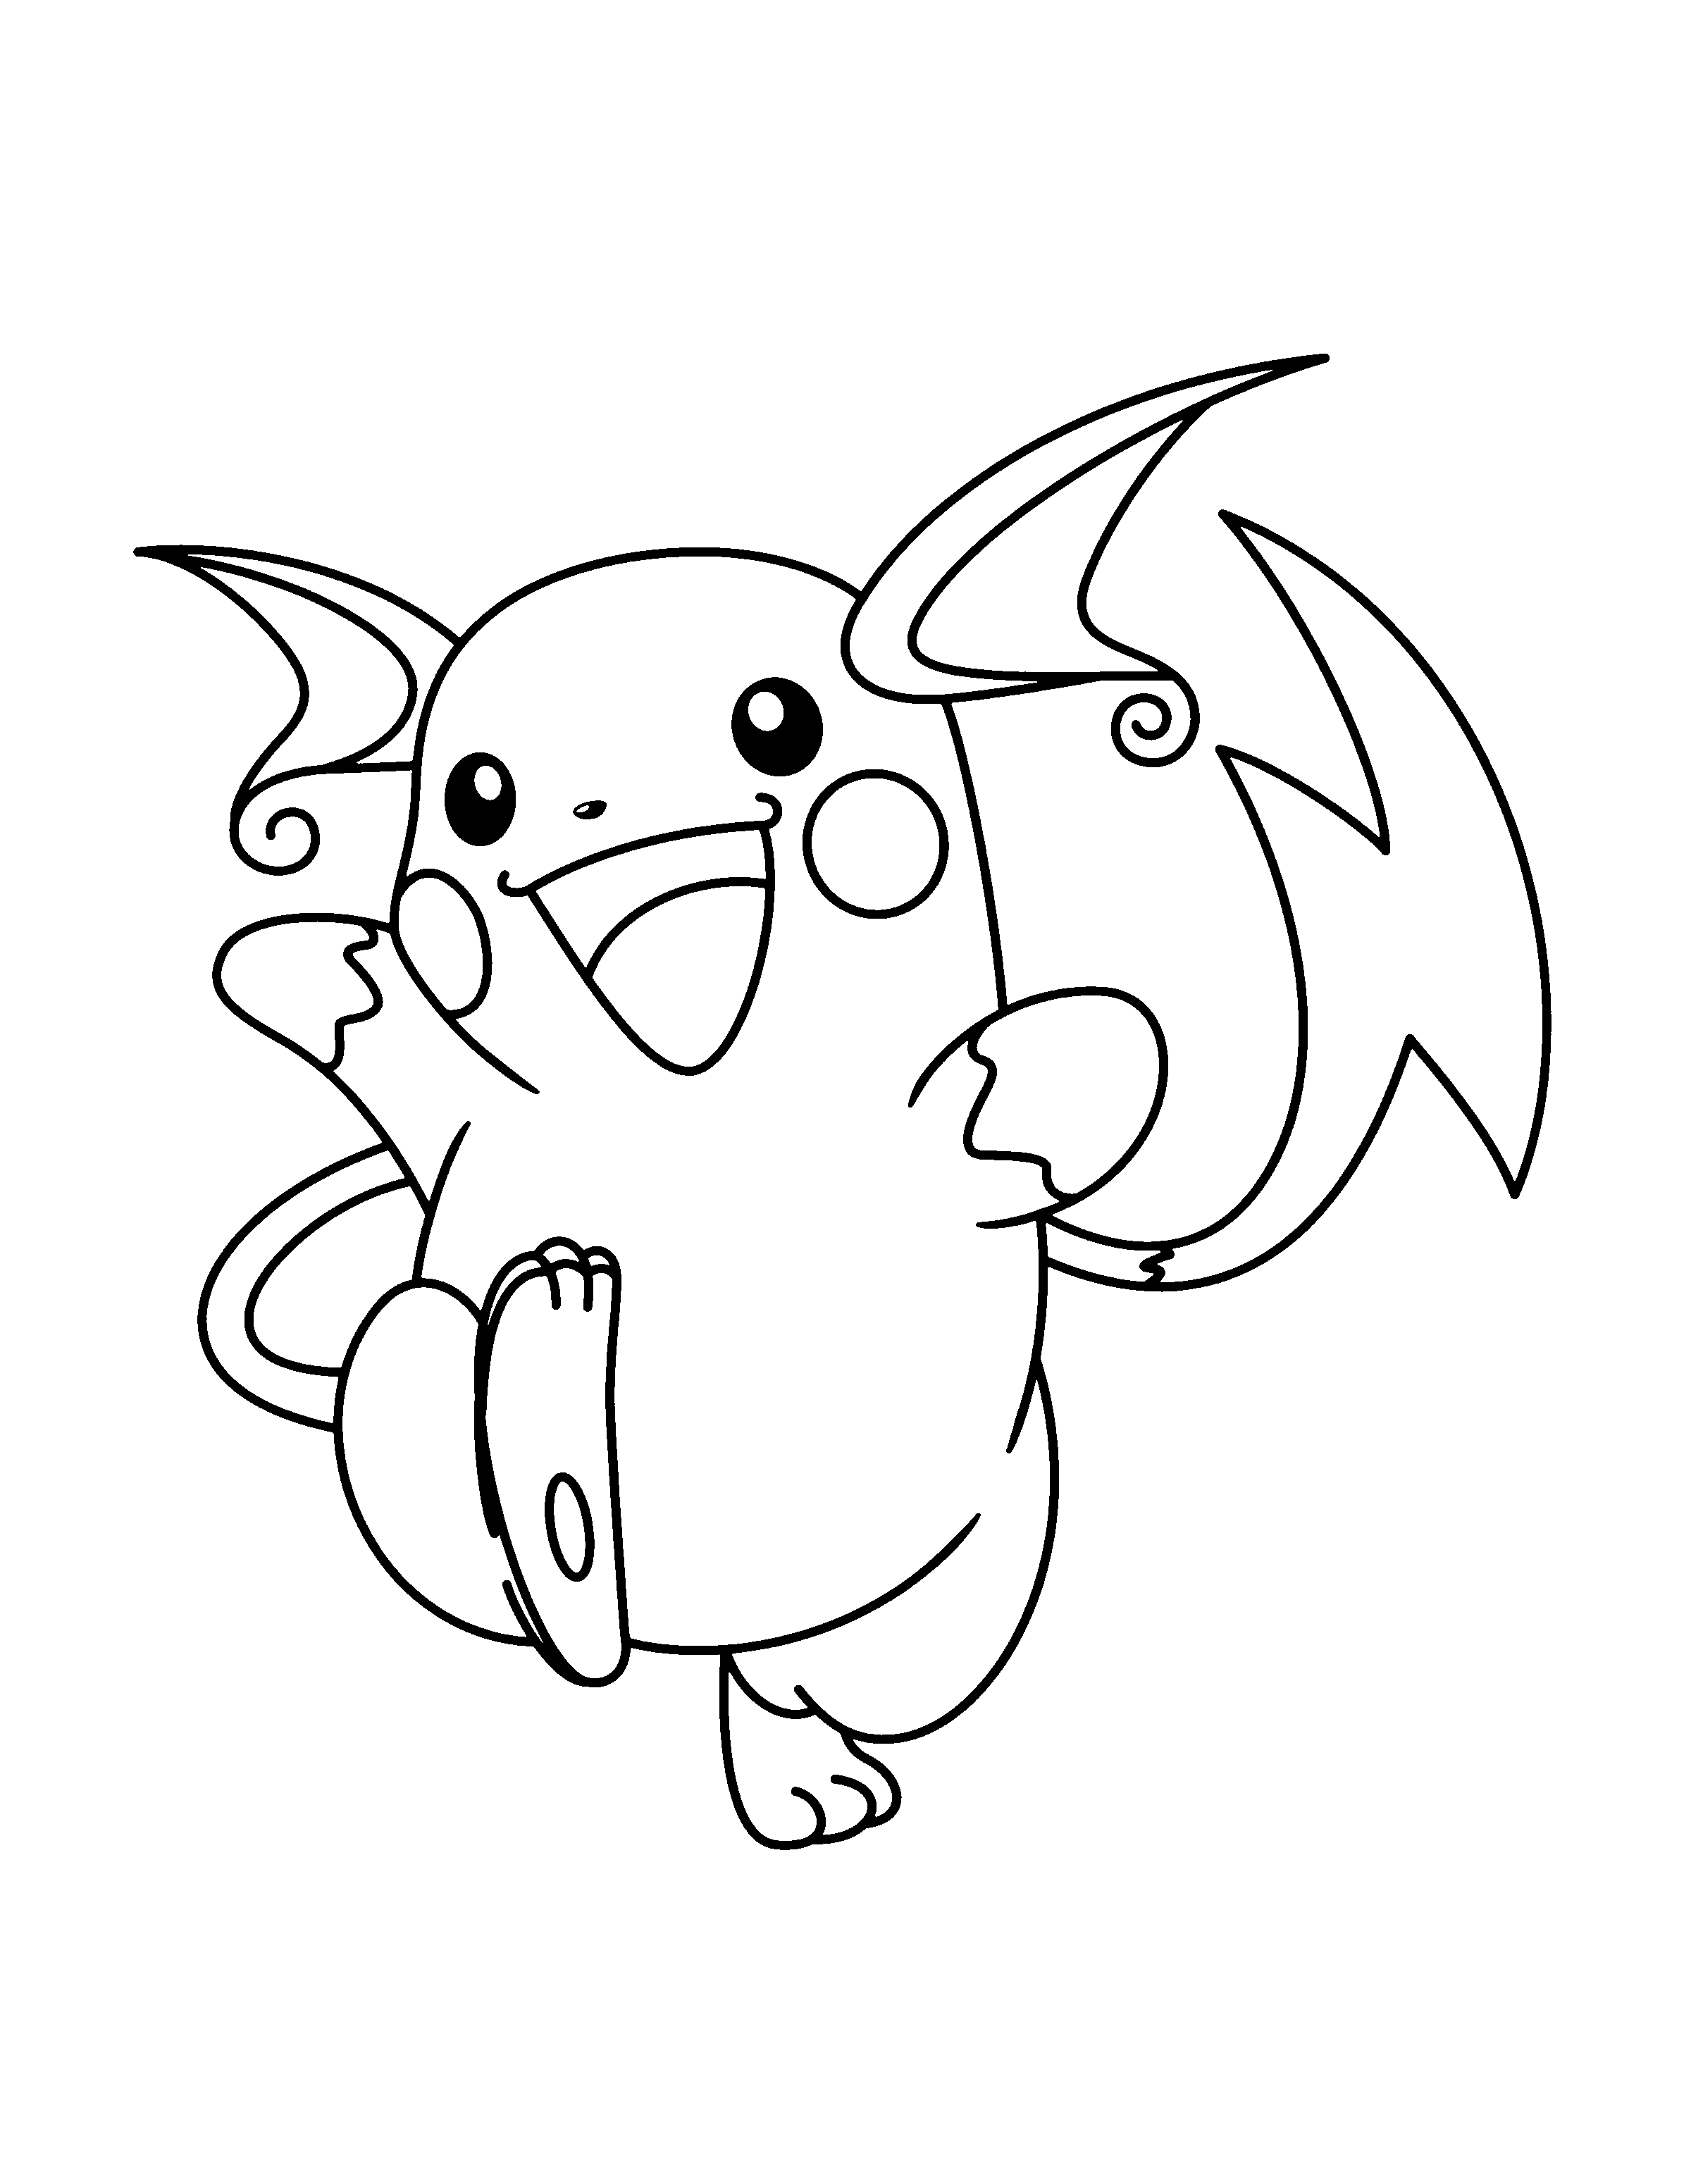 Coloring Page Pokemon Advanced Coloring Pages 123 Pokemon Coloring Pages Pokemon Draw